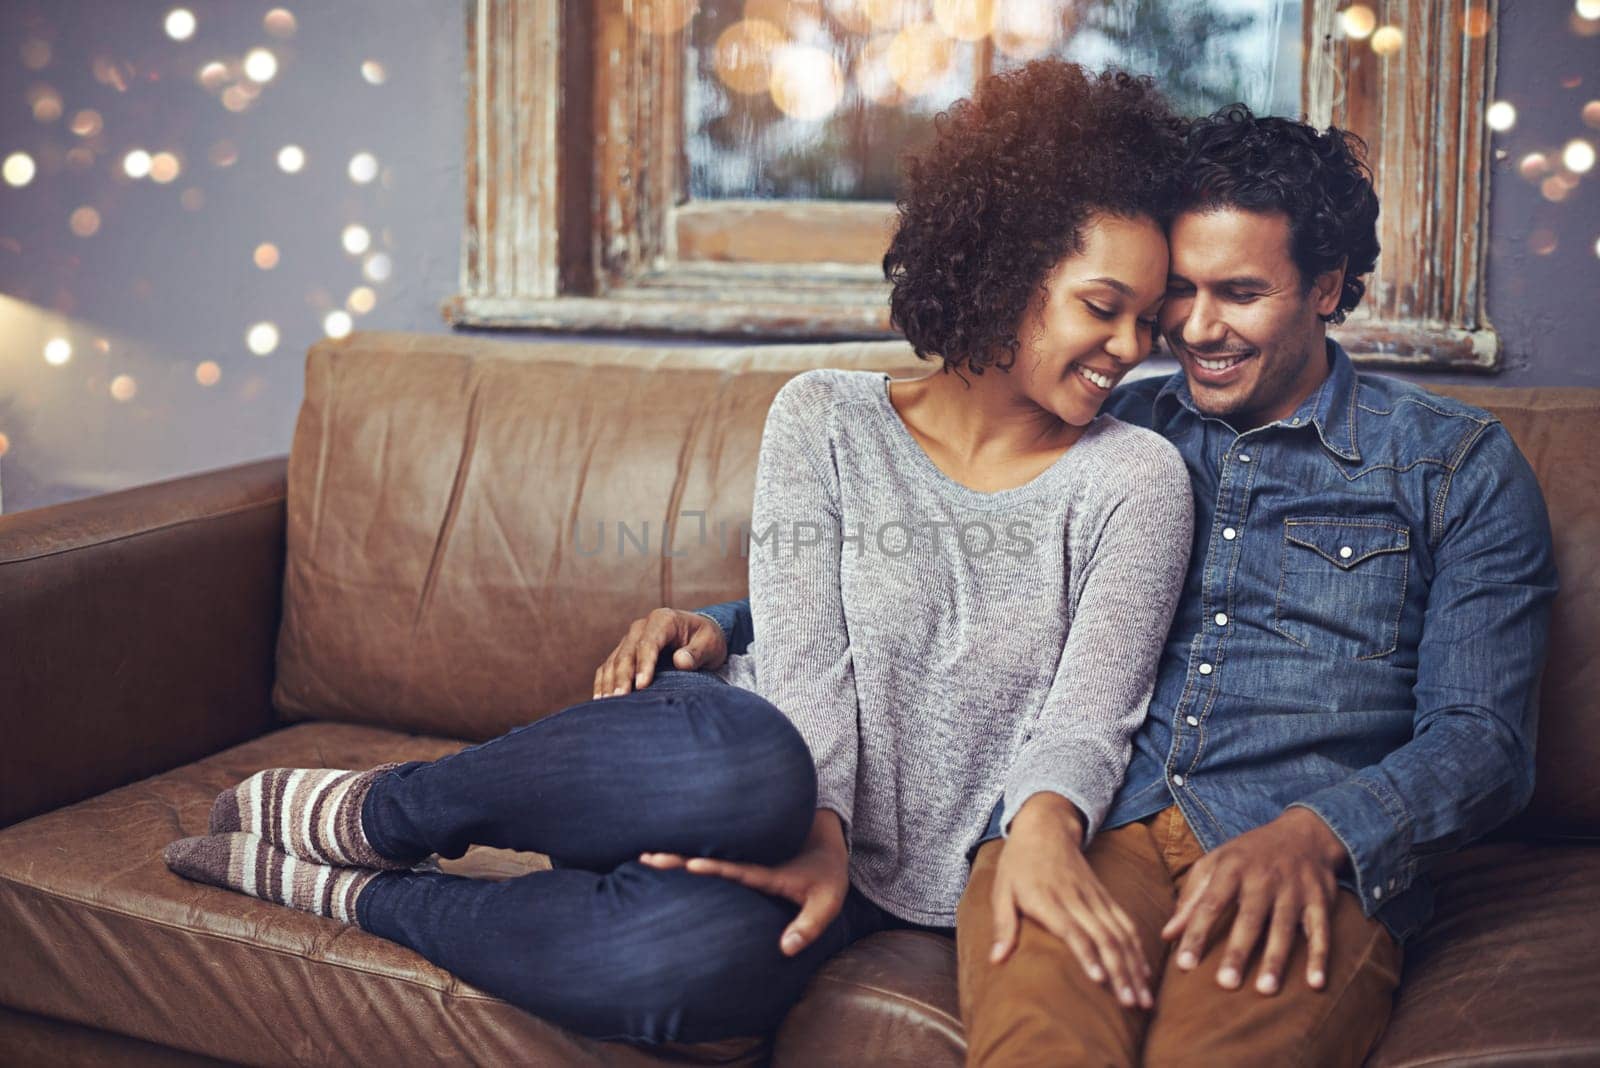 Hug, love and happy couple relax on a sofa, romantic and bonding on date night with bokeh. Interracial relationship, romance and man embrace woman on a couch, smile and chilling in a living room.